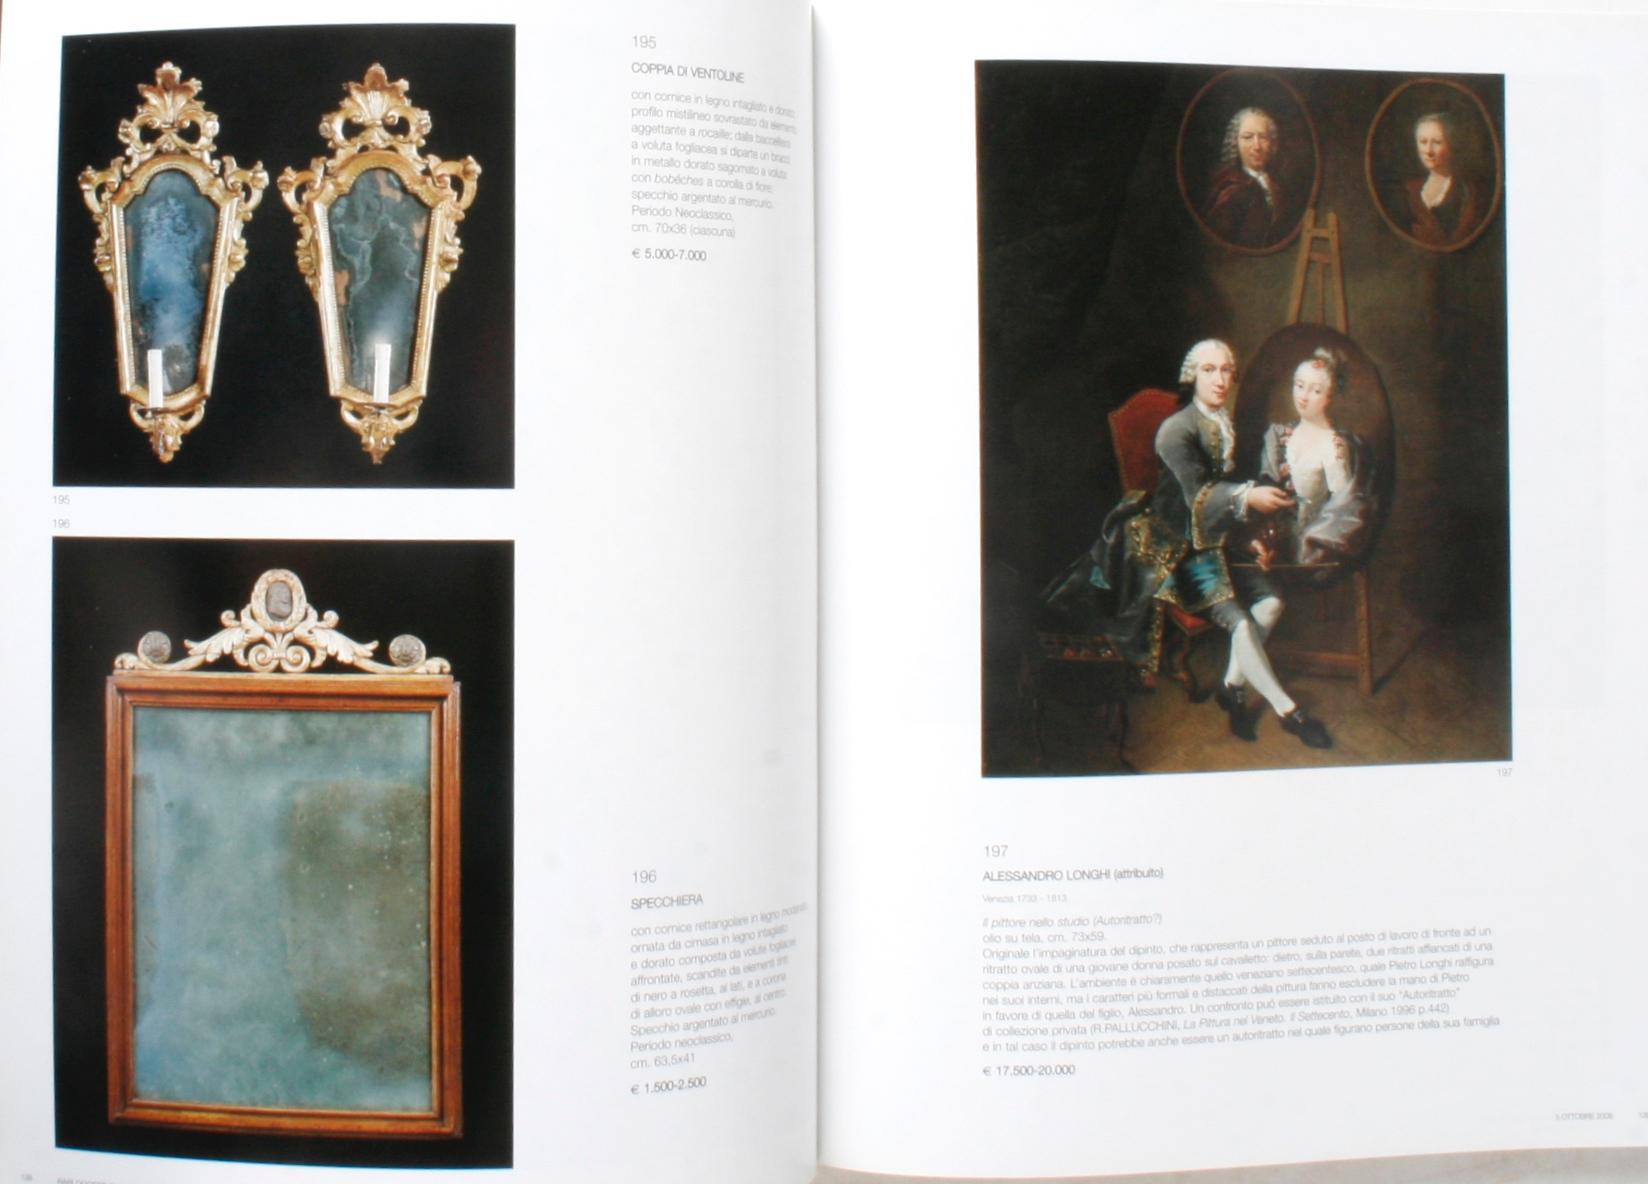 Auction Catalogue of Italian Fine Art, Silver, Ivory, and Venetian Objects, 2006 For Sale 7